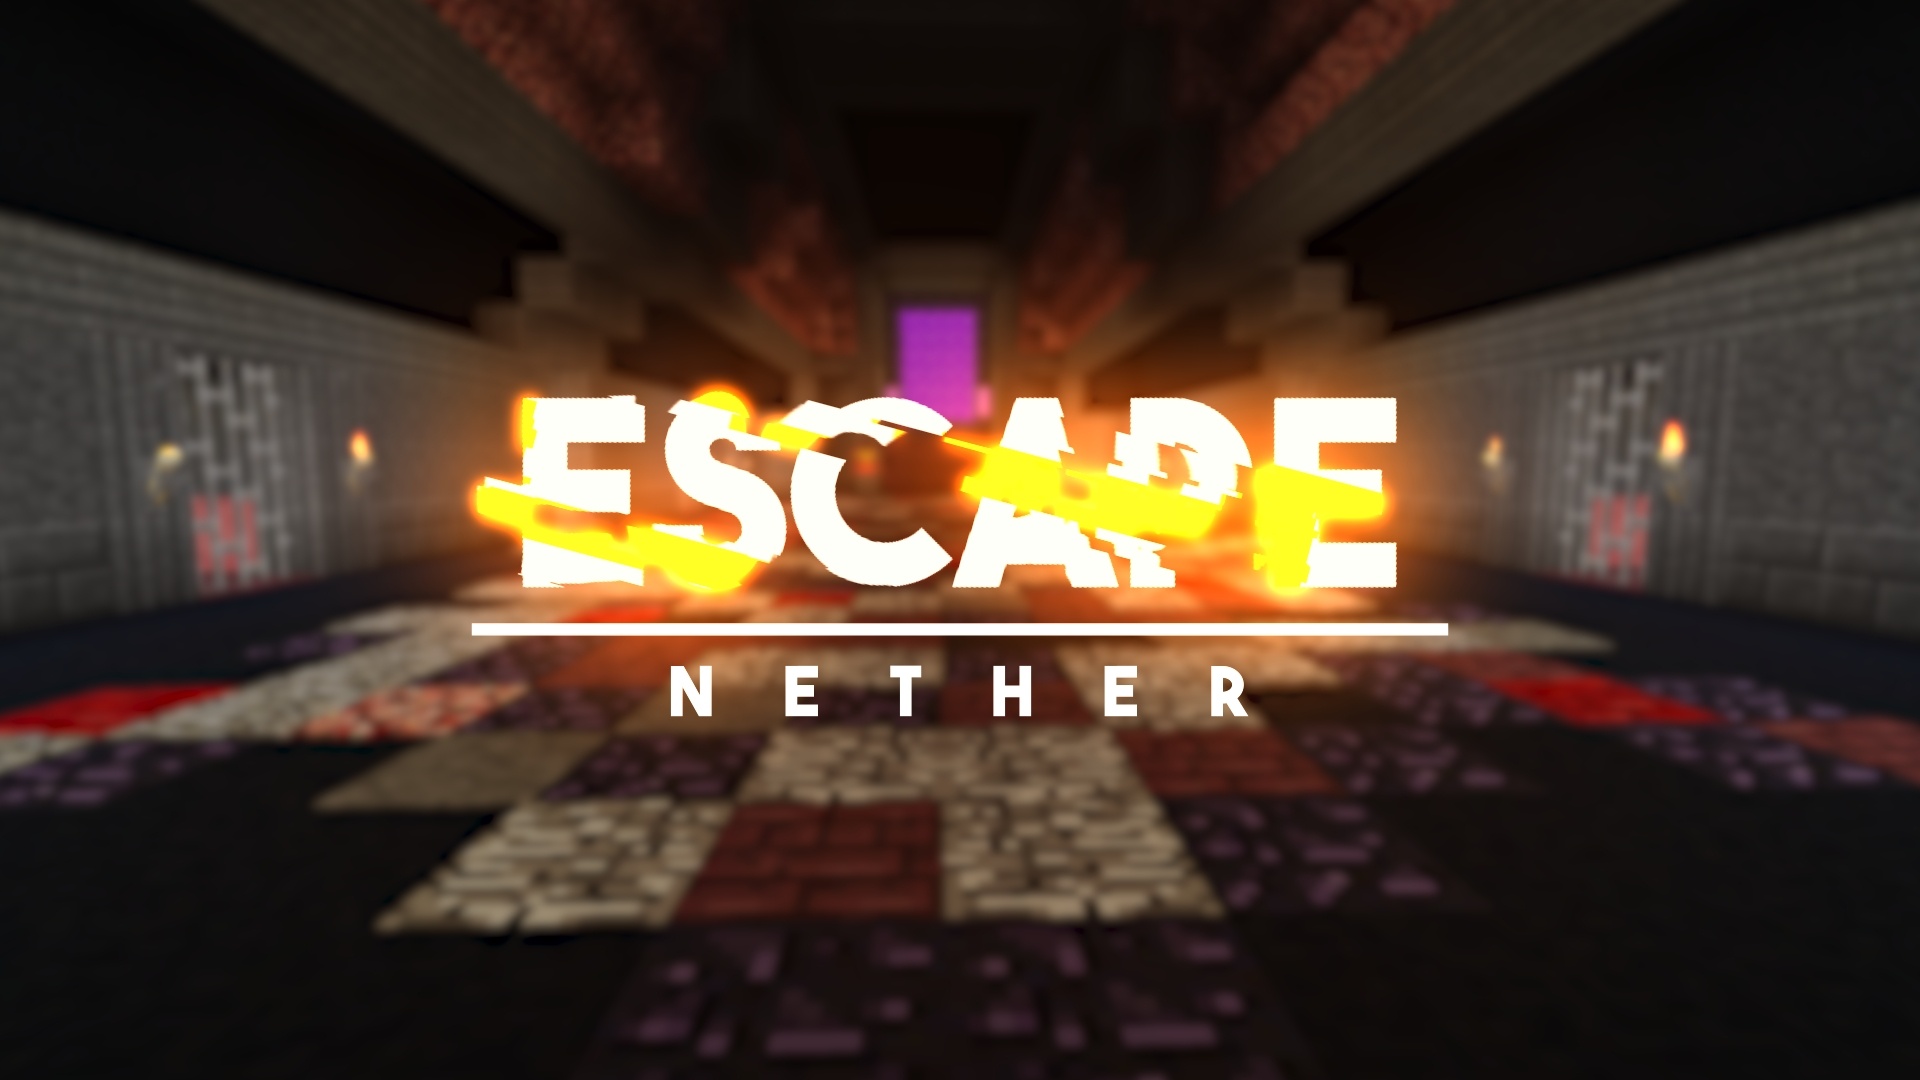 Escape: Nether